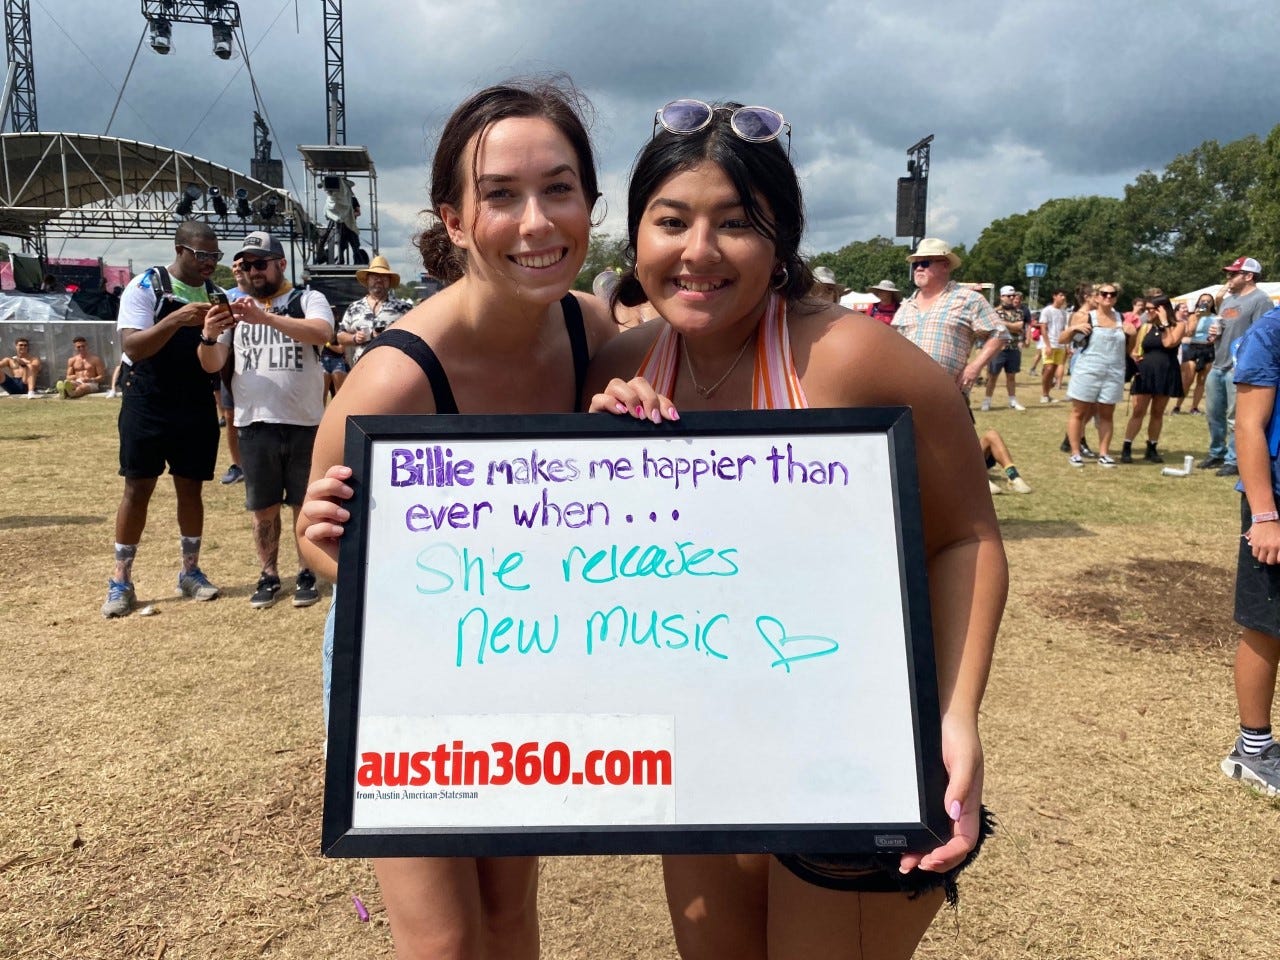 Maddy Neumann, 21, left, and Angelica Bermudez, 21, waiting for the Billie Eilish show on Saturday Oct. 2, 2021. Both are from Houston, Texas.